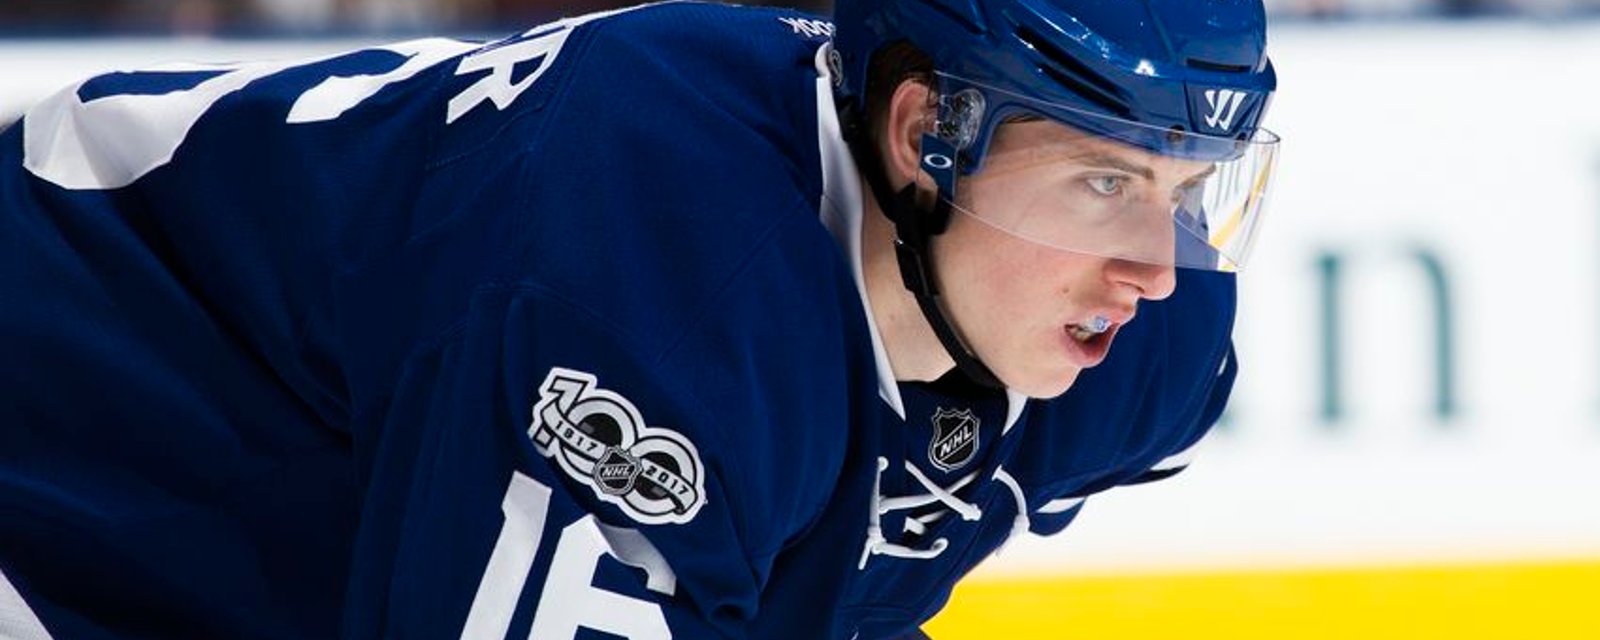 Marner caught in a lie when asked about offer sheet scenario